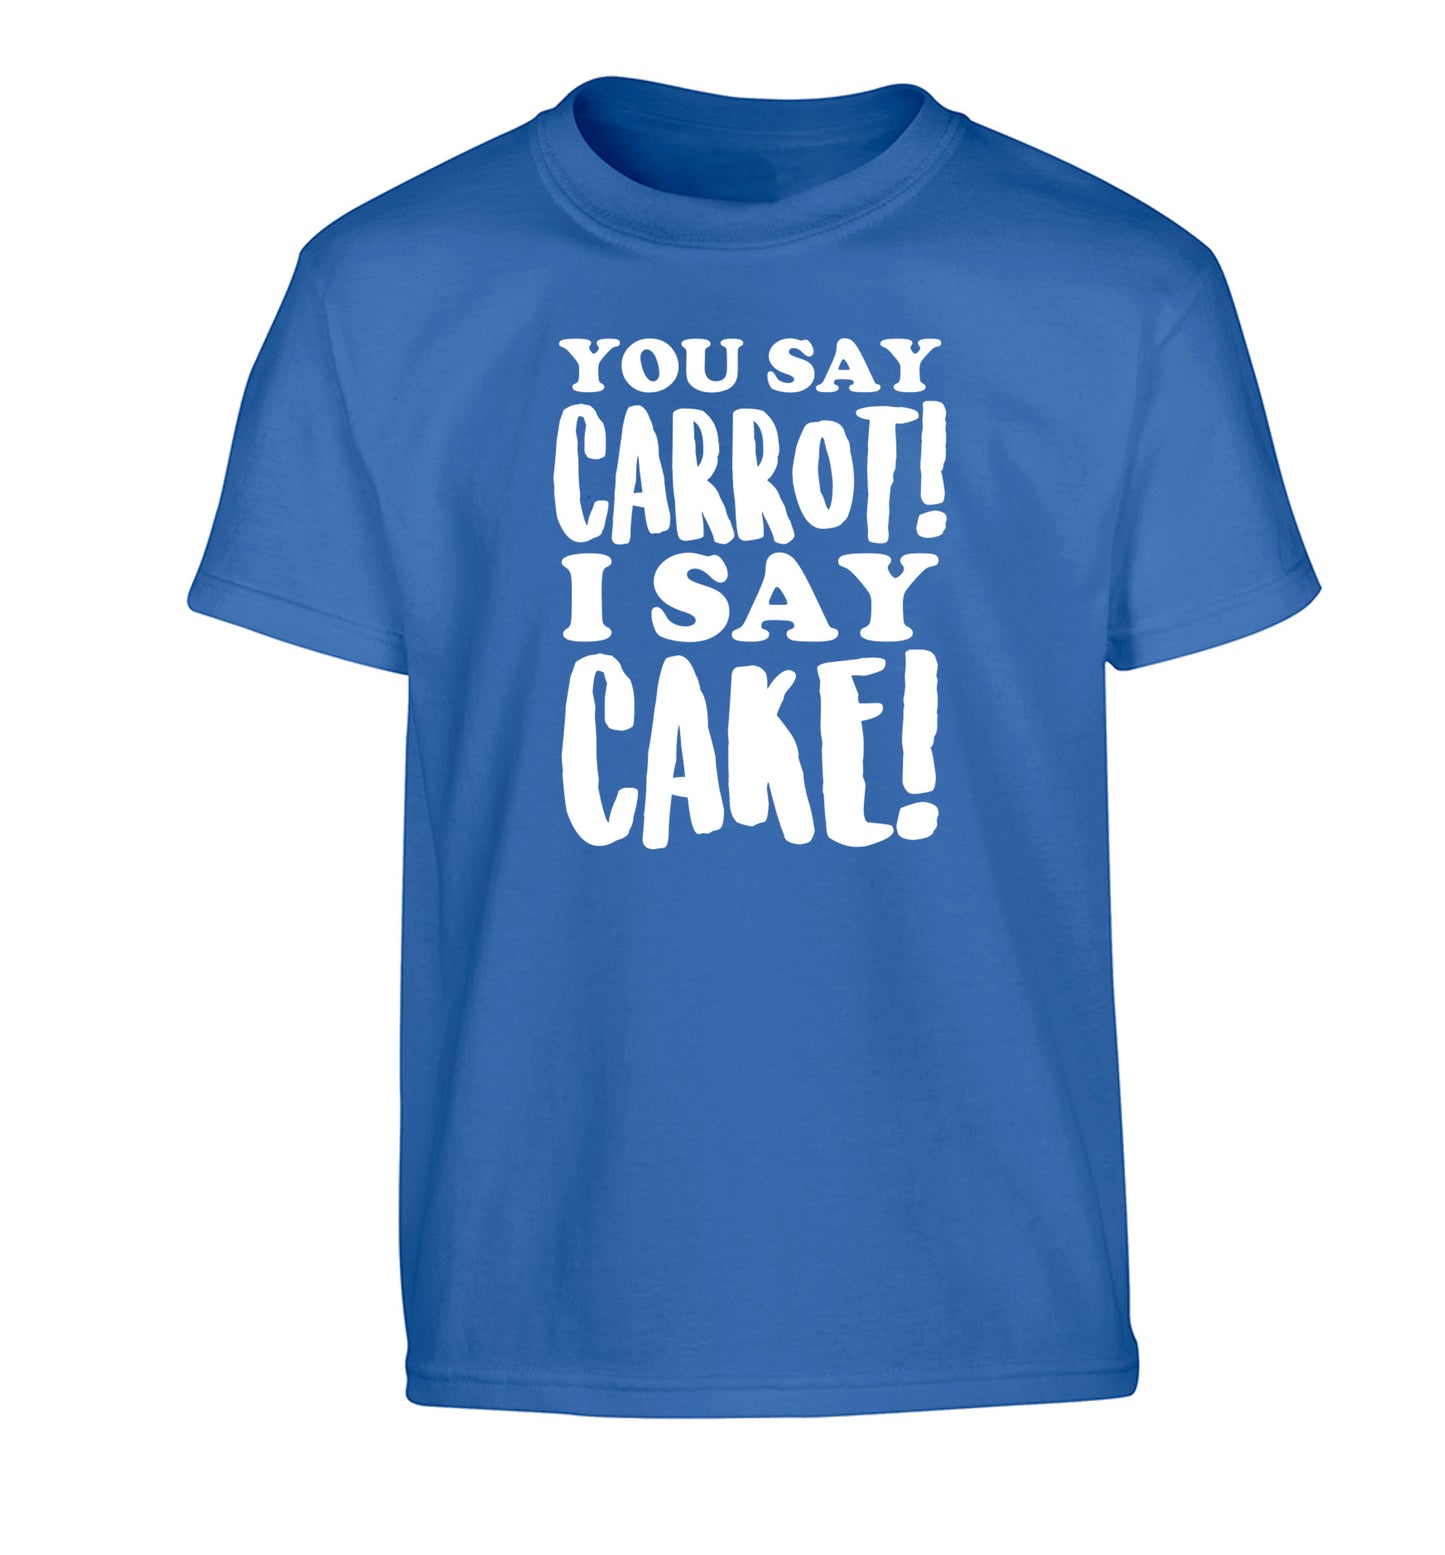 You say carrot I say cake! Children's blue Tshirt 12-14 Years